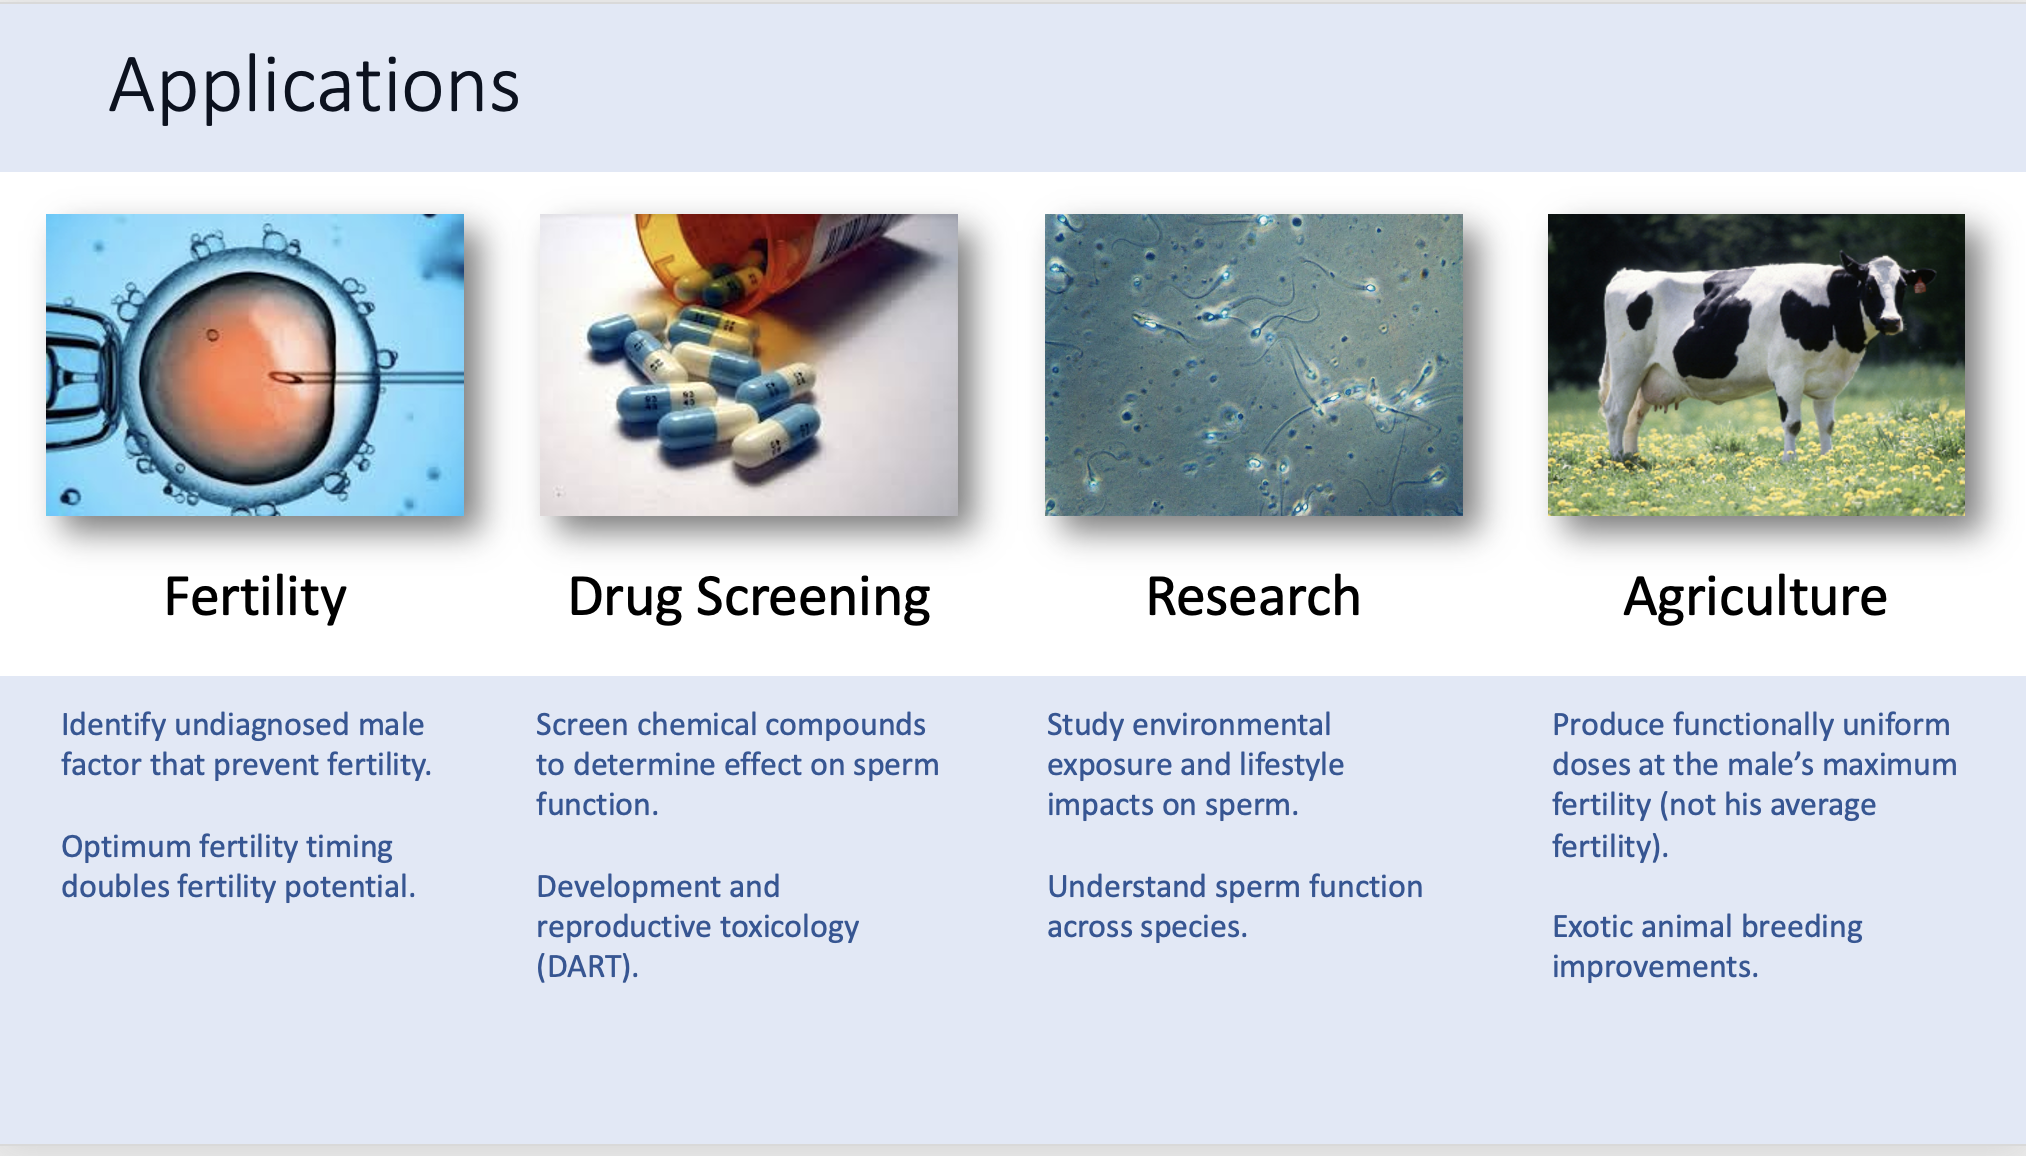 The image depicts the various applications for which the Kinetix Sperm Assay can be used. Applications discussed: Image of an egg being injected. 'Fertility—Identify undiagnosed male factor that prevent fertility. Optimum fertility timing doubles fertility potential.' Image of pills and a pill container. 'Drug Screening—Screen chemical compounds to determine effect on sperm function. Development and reproductive toxicology (DART)' Microscopic image of sperm. 'Research—Study environmental exposure and lifestyle impacts on sperm. Understand sperm function across species.' Image of a bull. 'Agriculture—'Produce functionally uniform doses at the male's maximum fertility (not his average fertility). Exotic animal breeding improvements.'